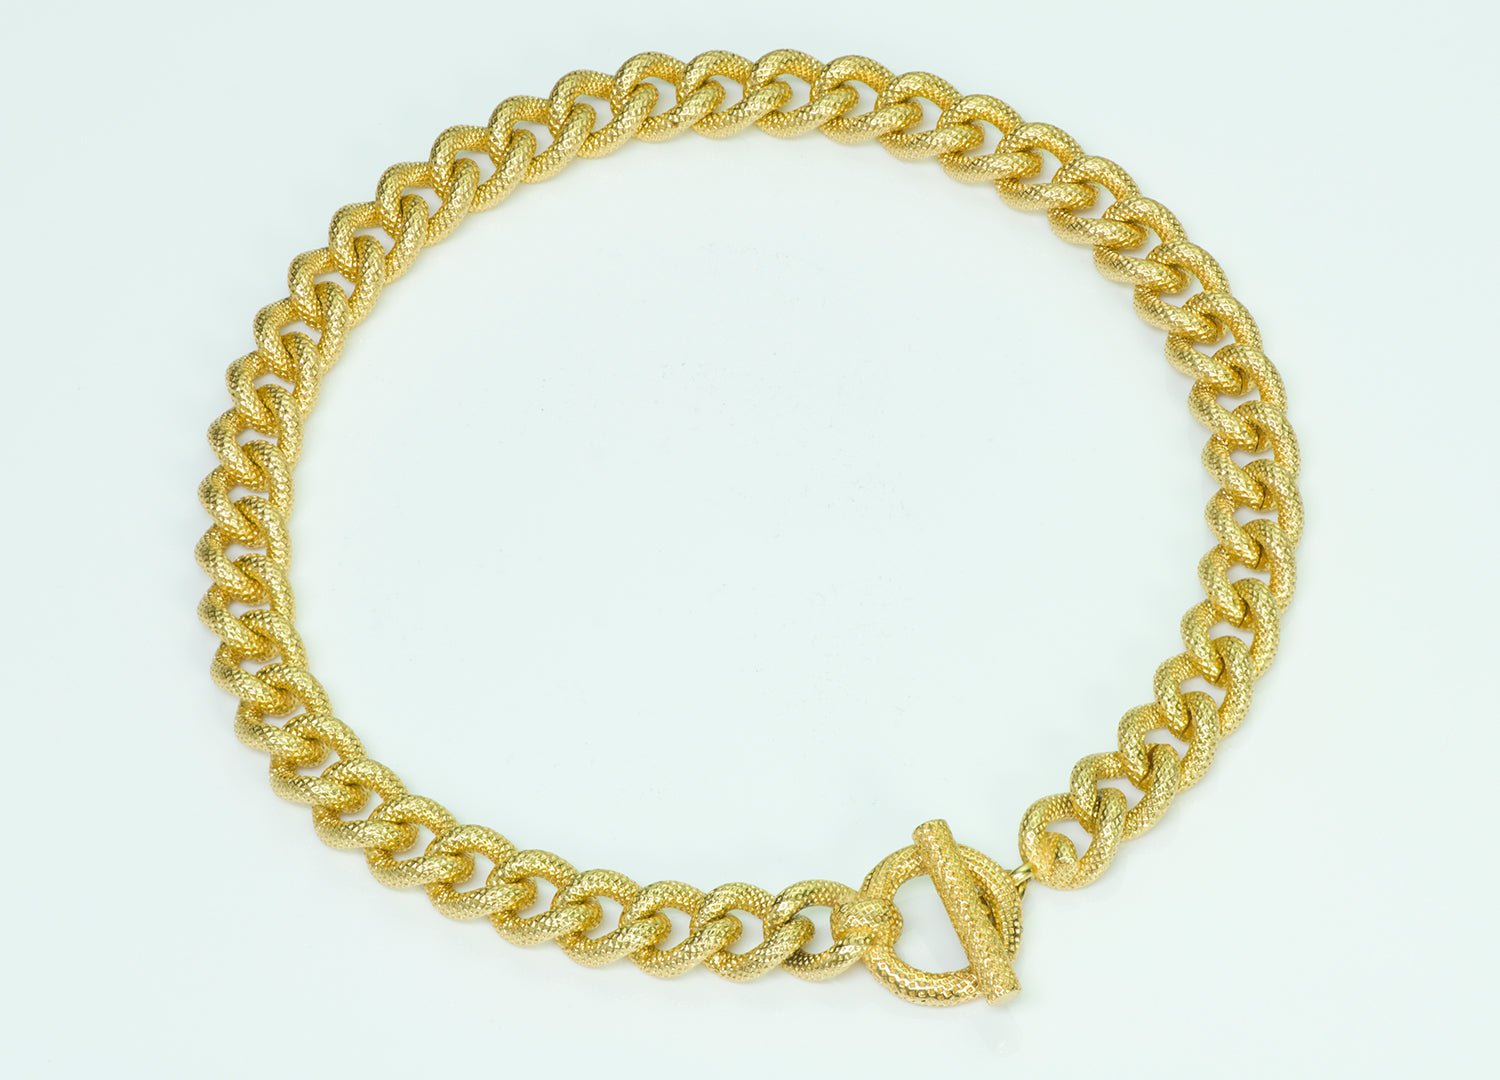 Vintage Christian Dior Gold Tone Chain Necklace